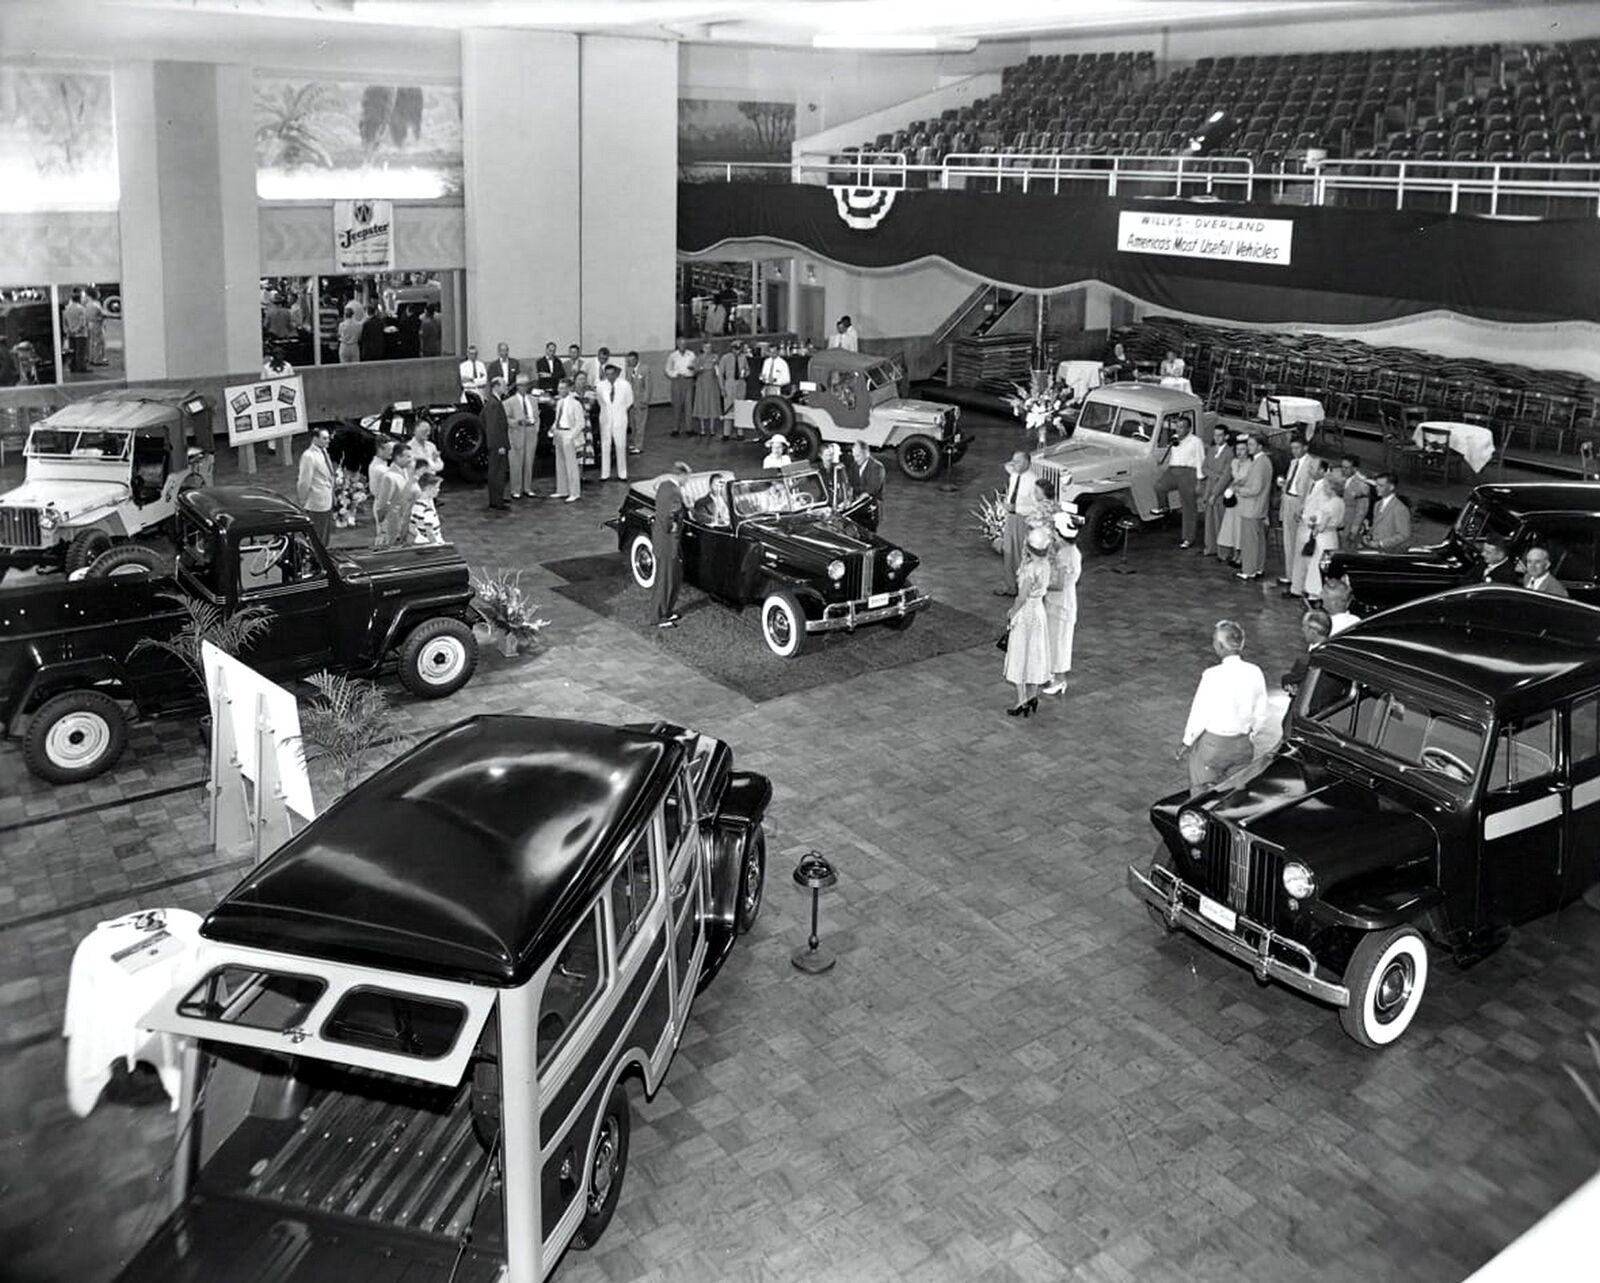 1948 WILLYS JEEP SHOW Photo (224-M )